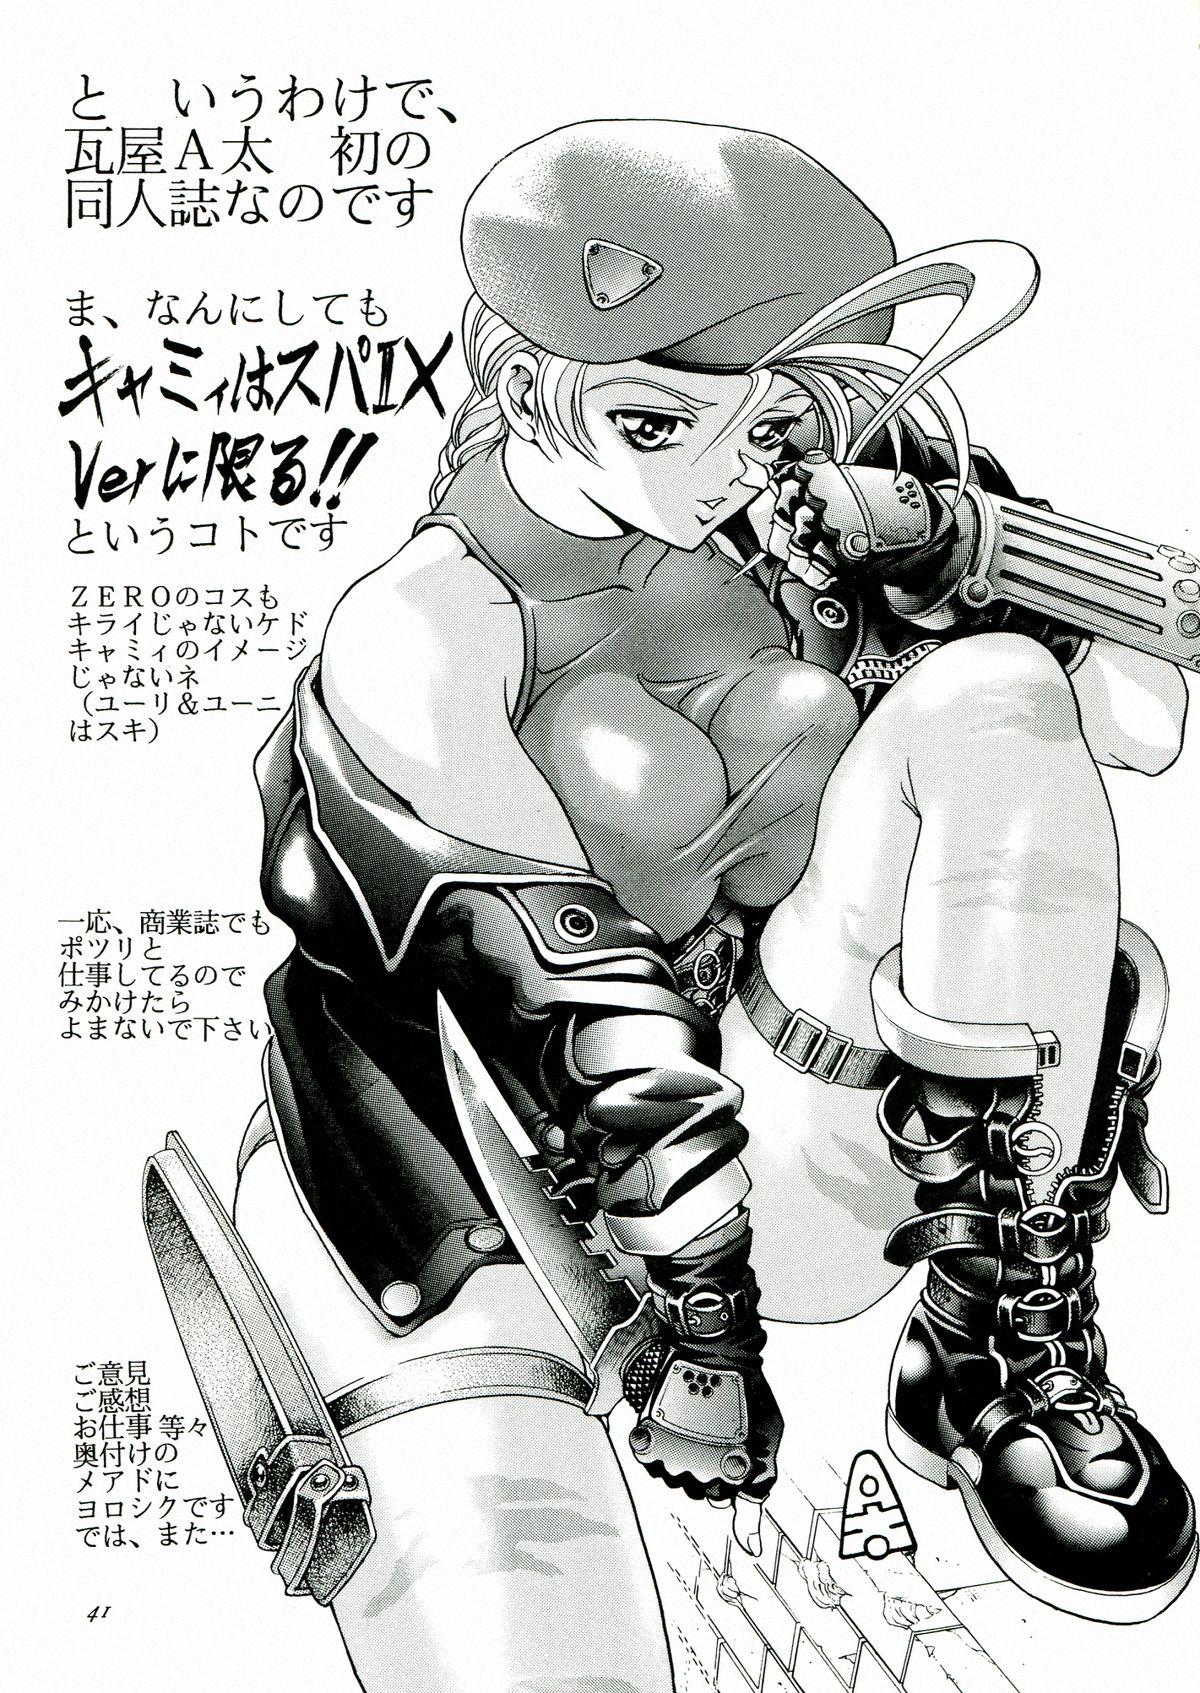 Awesome Kawaraya Honpo vol. 1 - Street fighter King of fighters Hugecock - Page 41